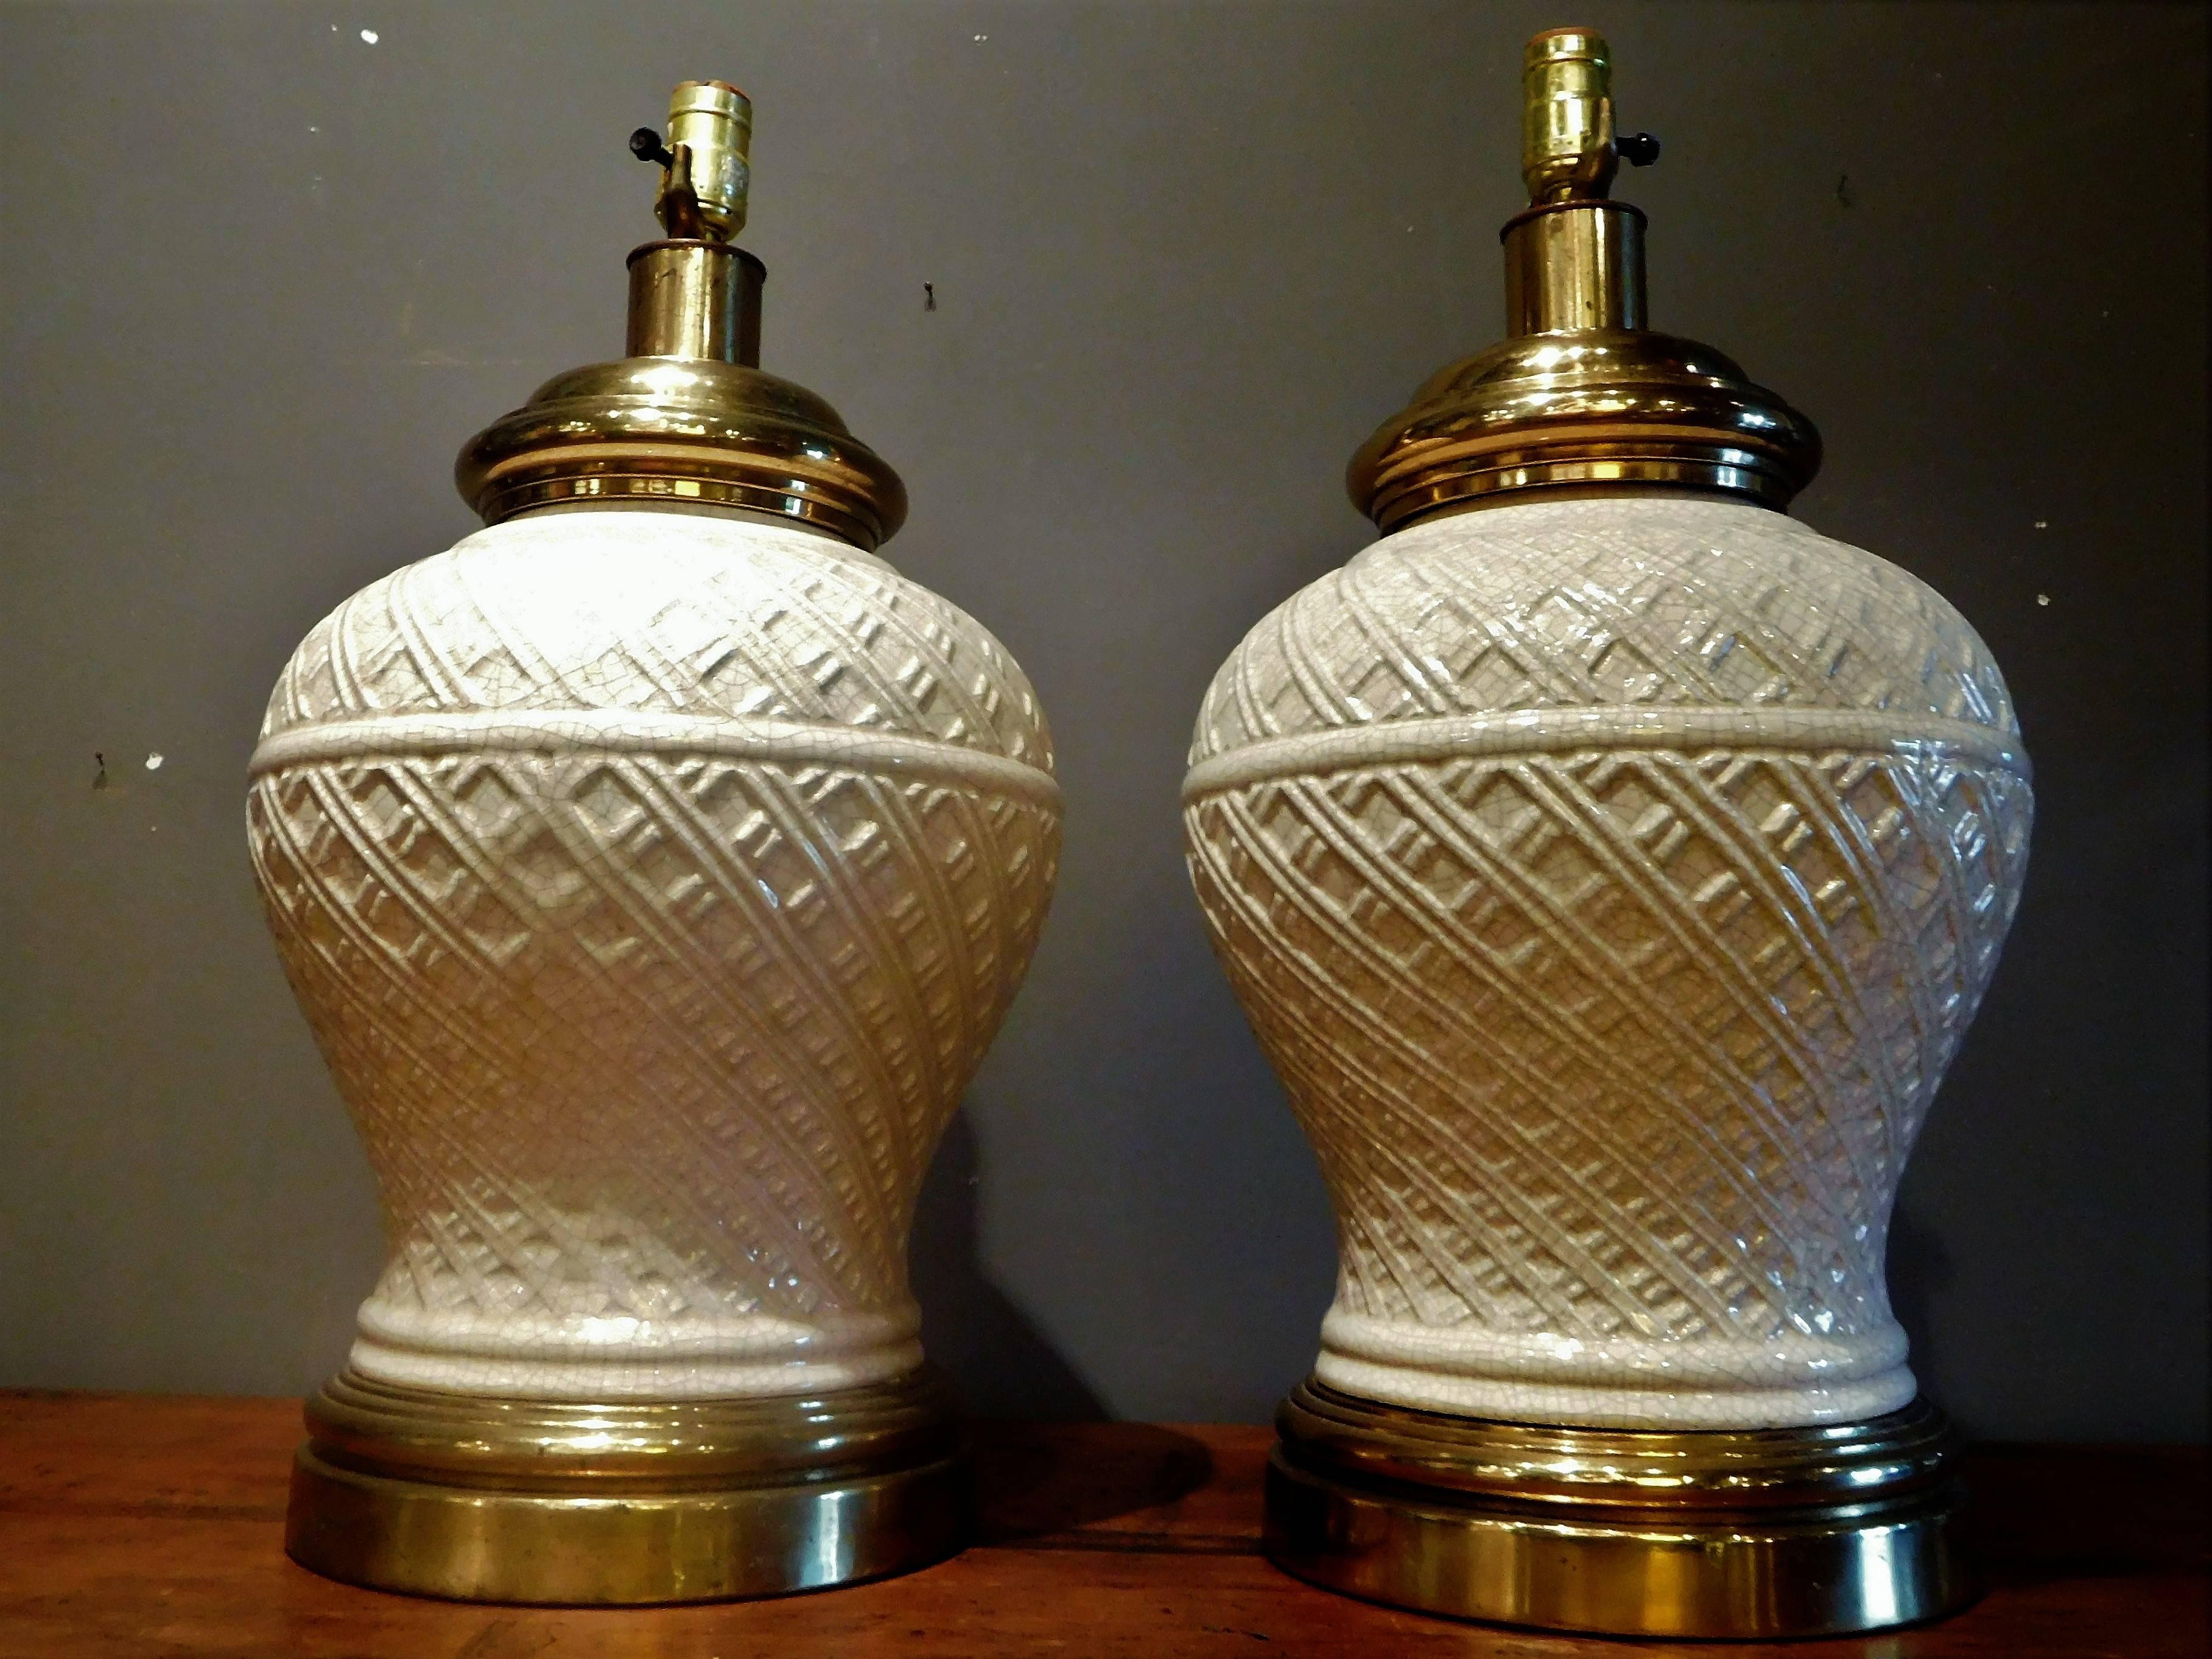 Pair of Ceramic Basket-Weave Paul Hanson Lamps with Ivory Crackle Glaze, 1955 For Sale 1